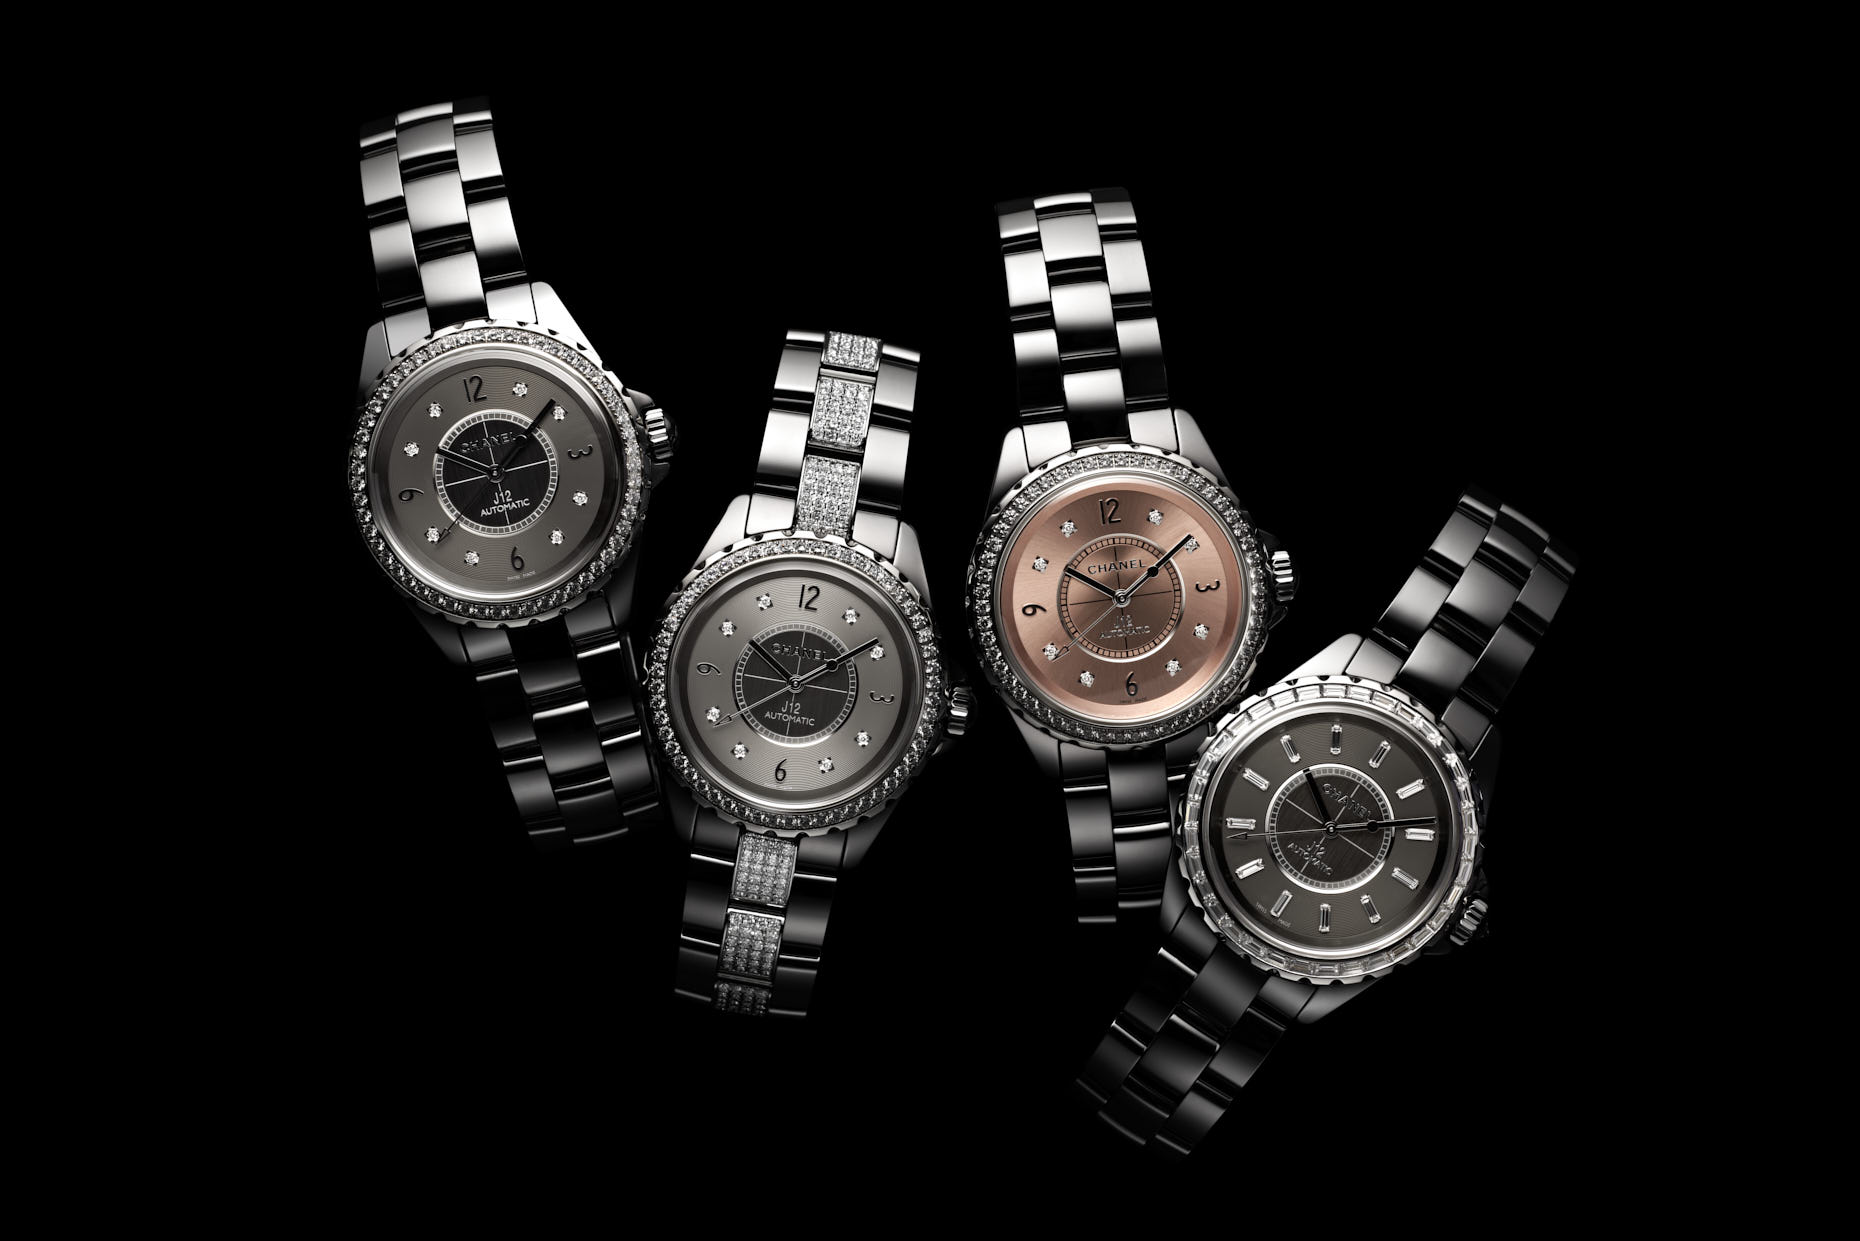 Jeff Stephens | Chanel Watches